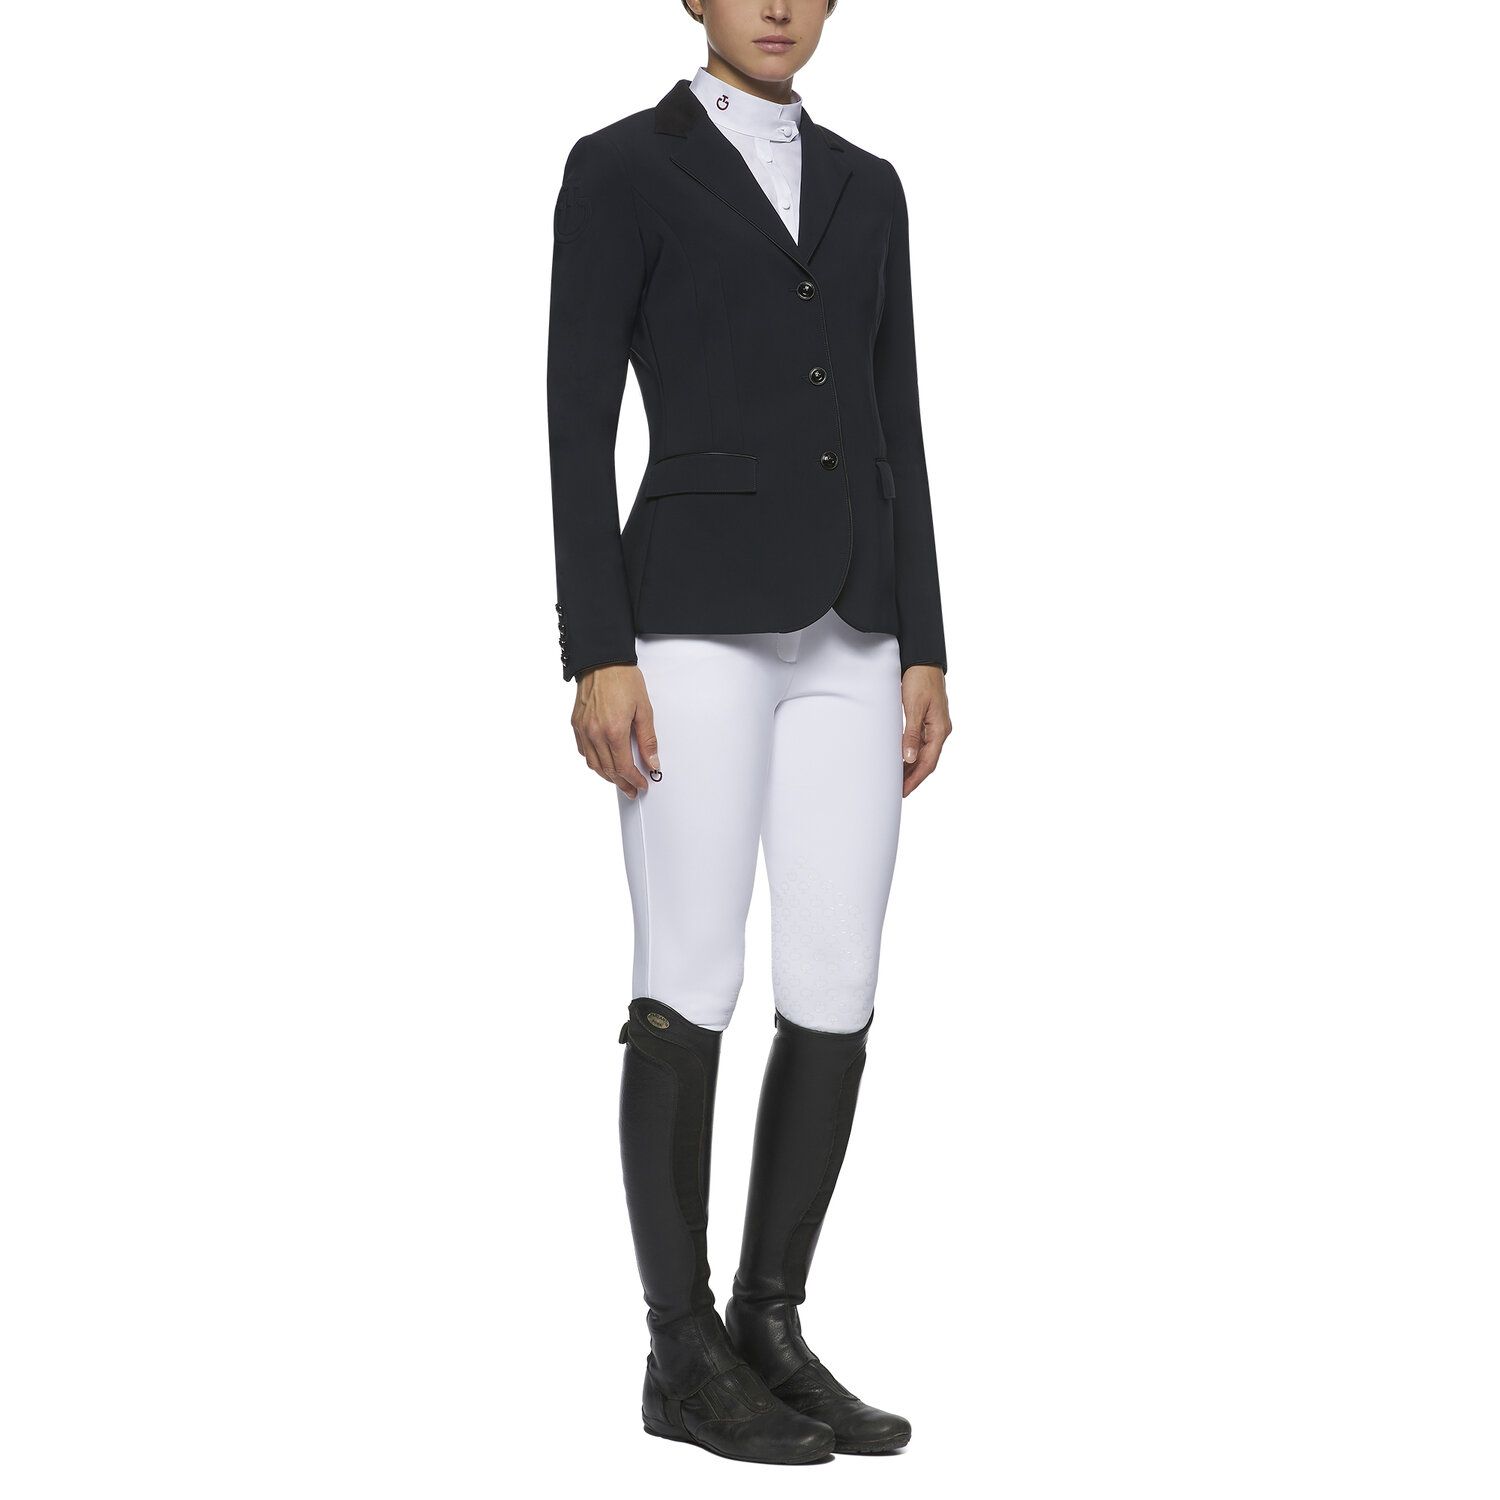 Cavalleria Toscana Women`s competition riding jacket NAVY-2